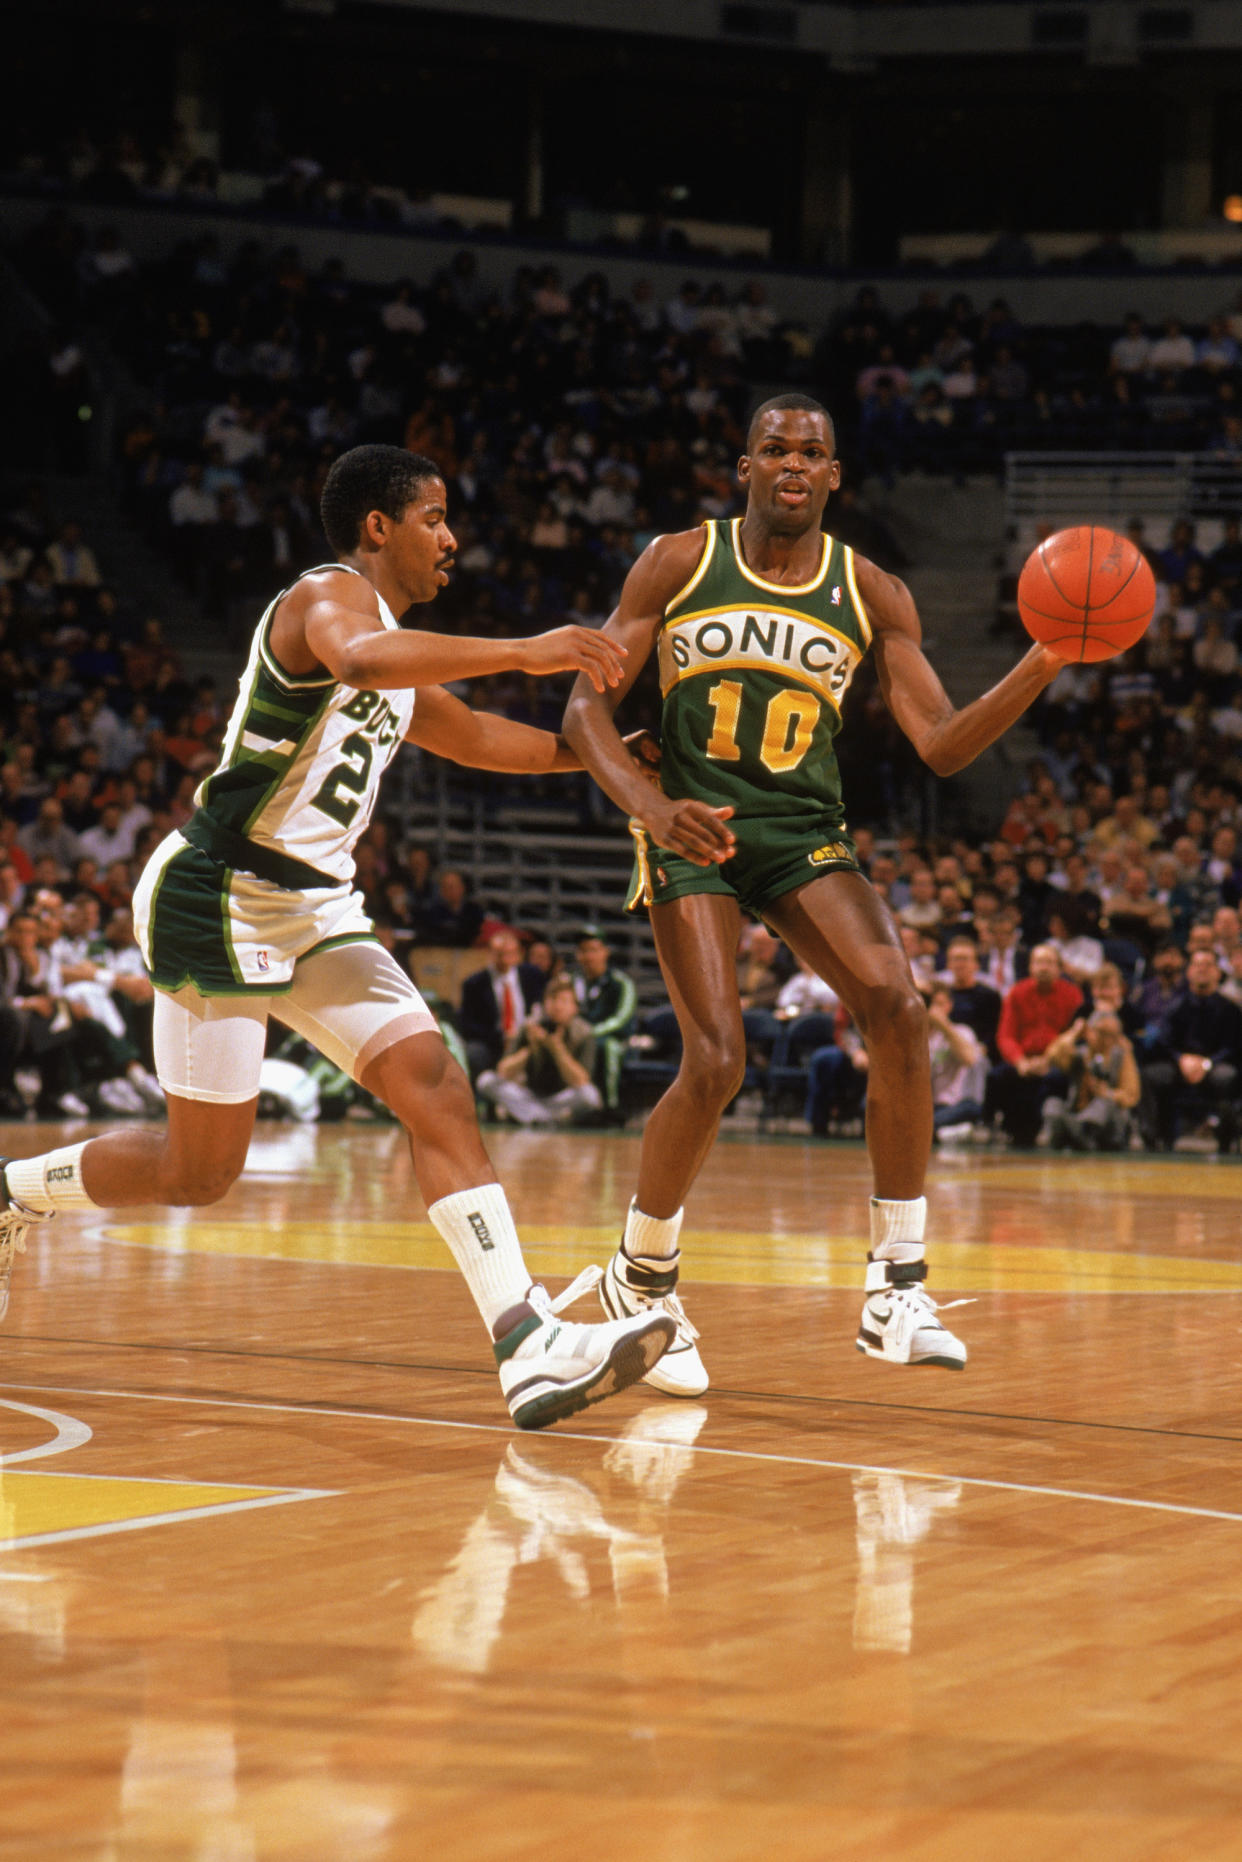 Seattle's Nate McMillan is guarded by Milwaukee's Jay Humphries during a game in the 1988-89 season. (Jonathan Daniel/Getty Images)